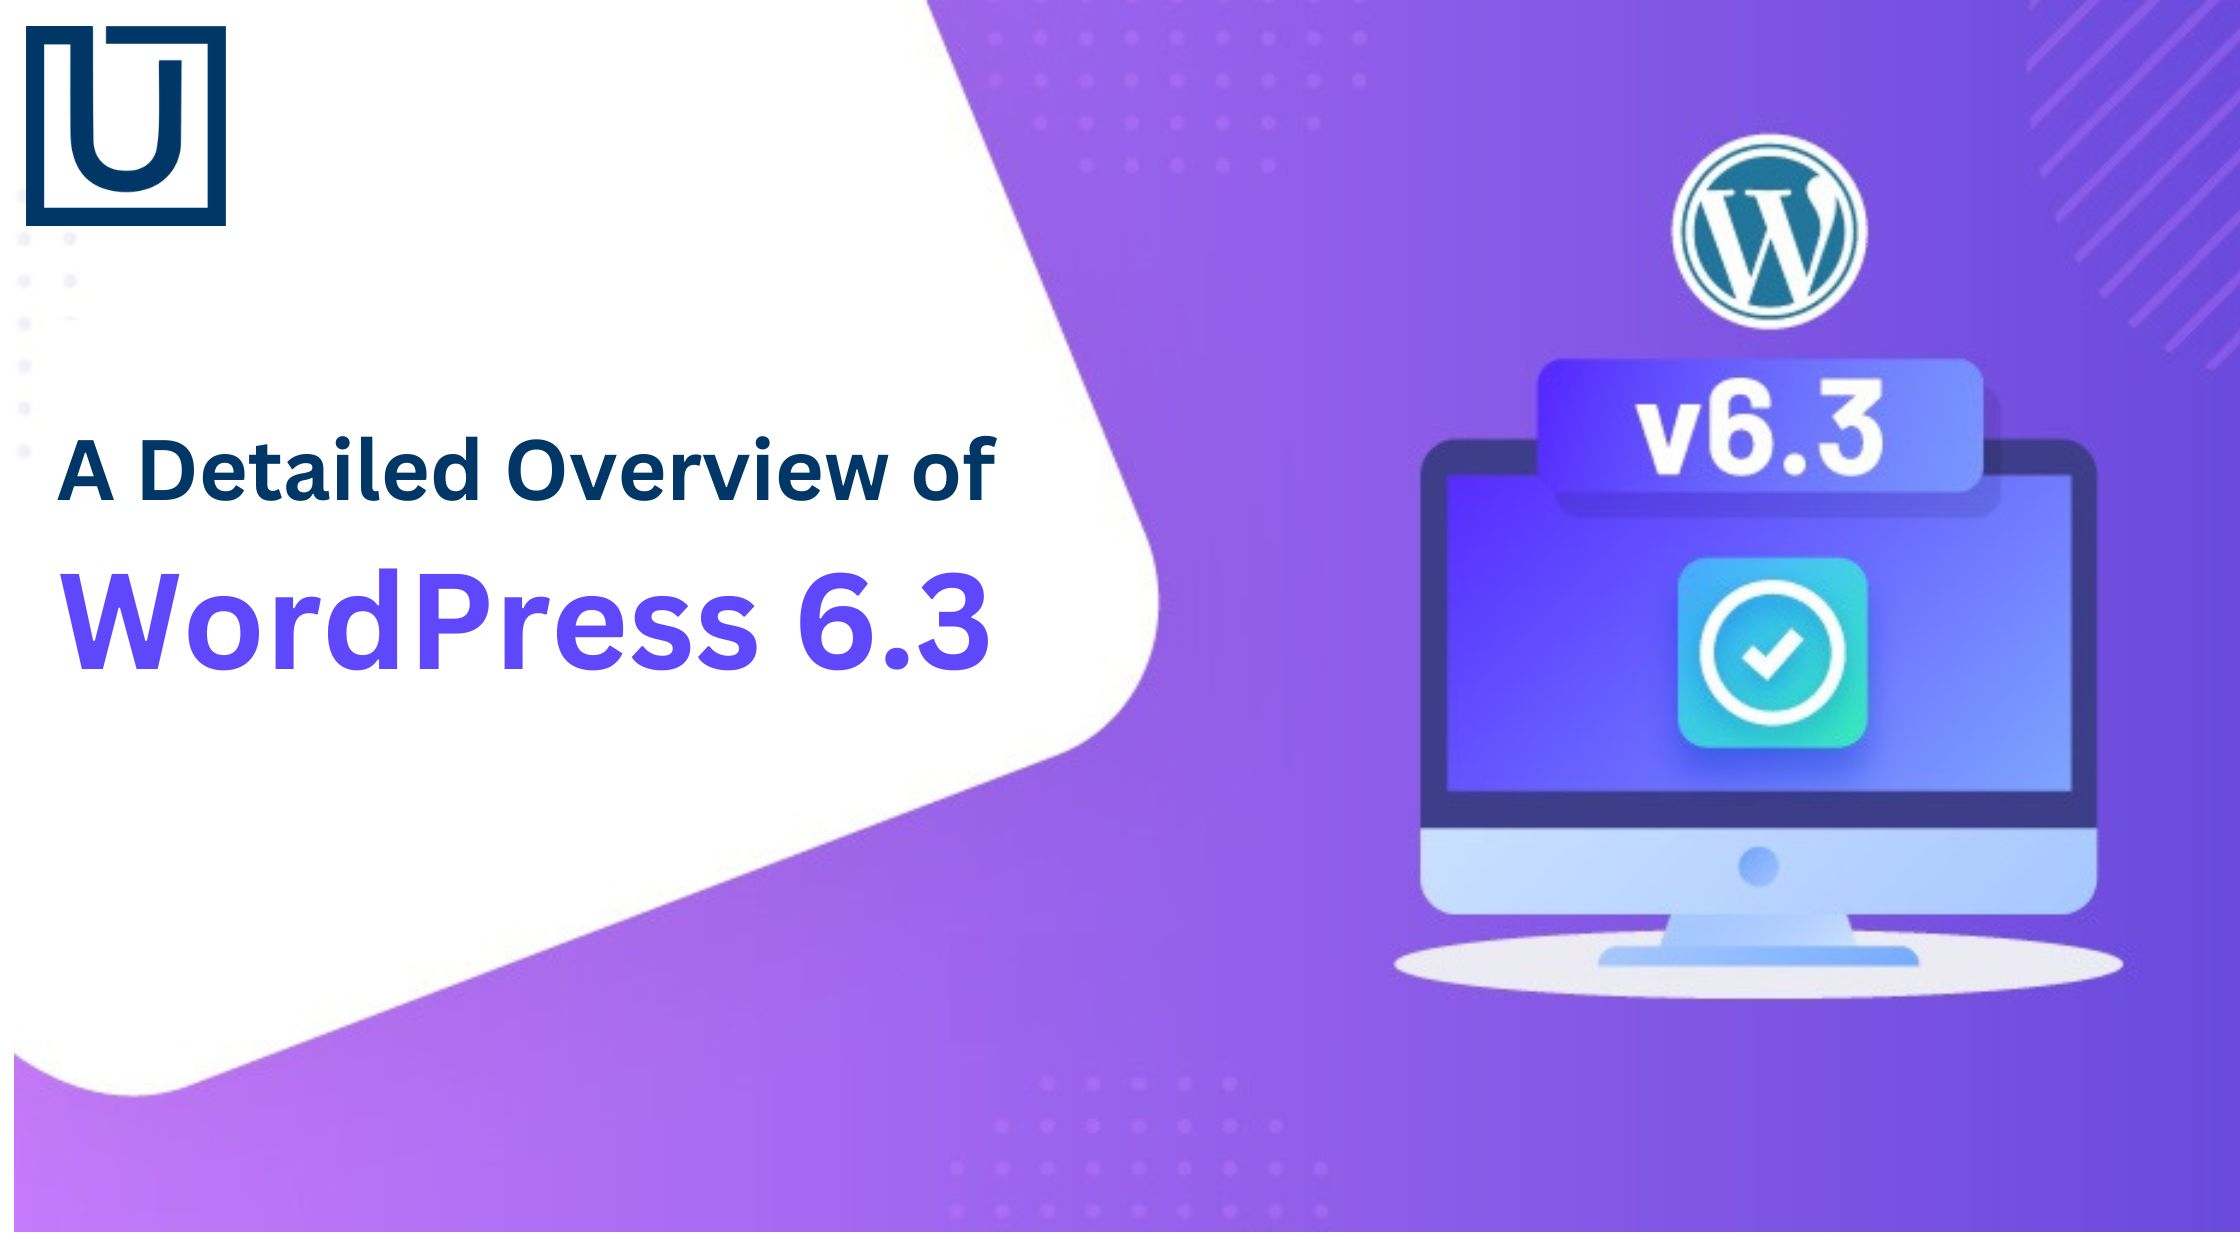 A Detailed Overview of WordPress 6.3